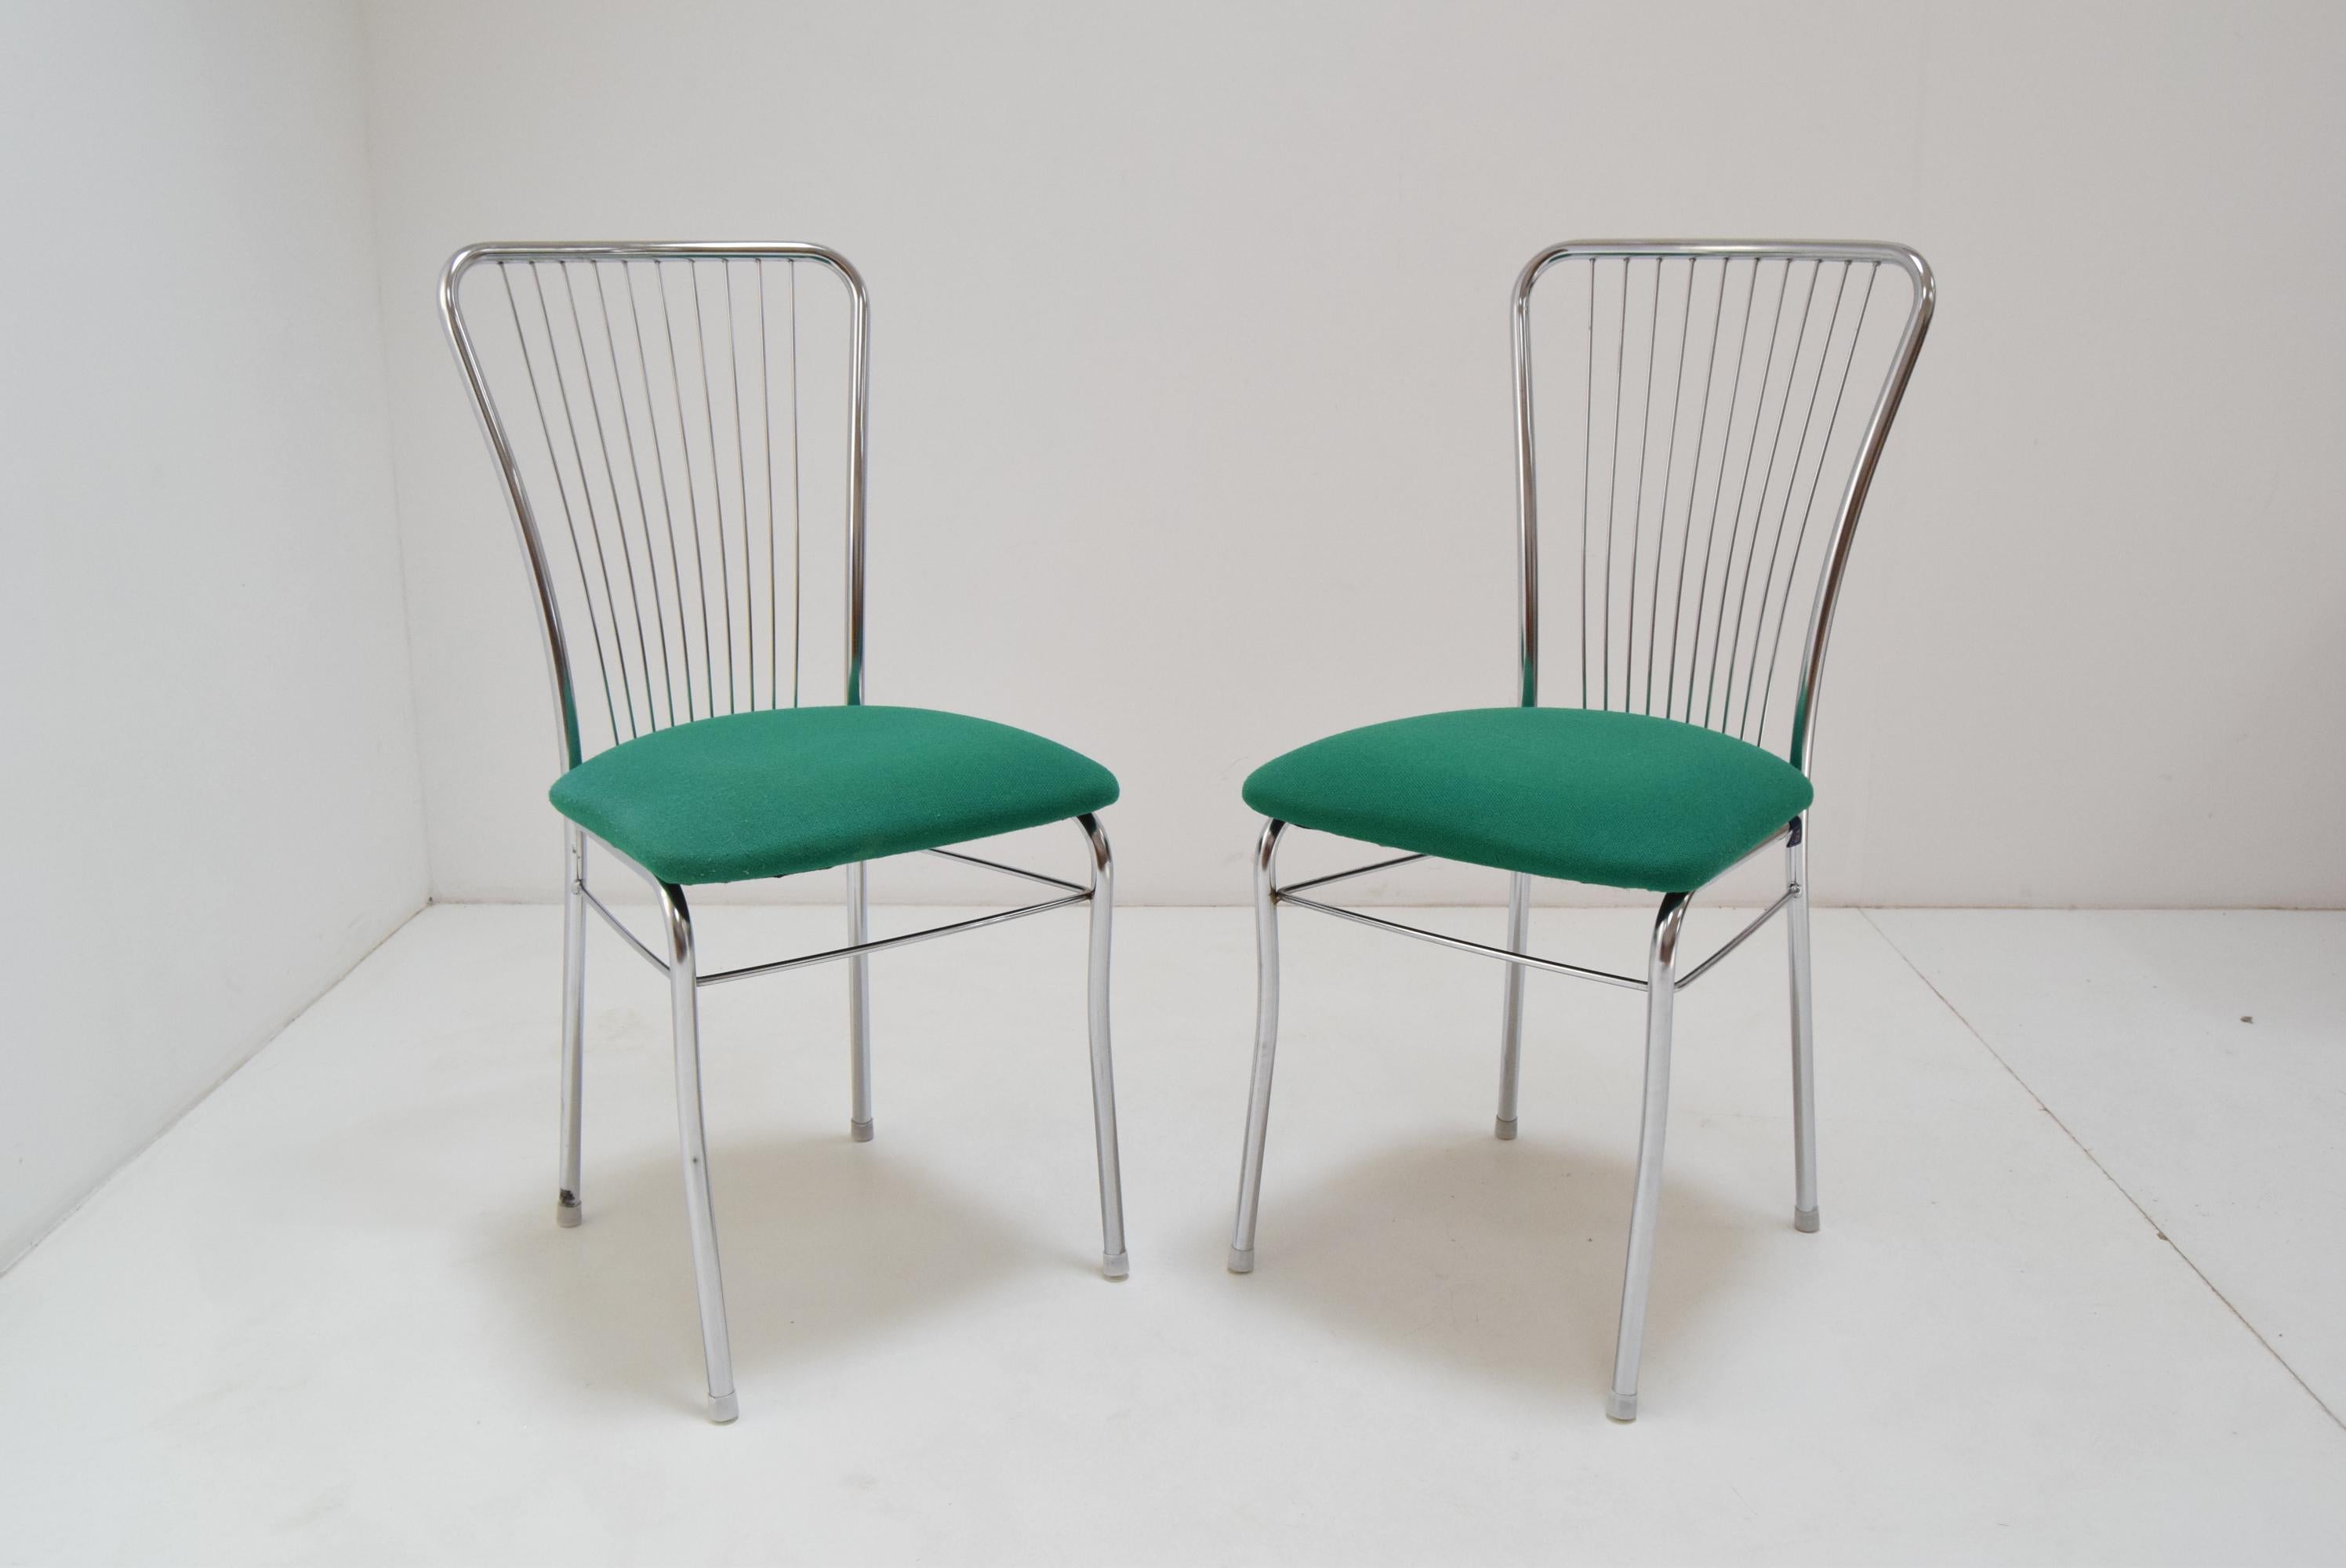 Mid-Century Modern Pair of Mid-Century Chrome Chairs, Nowy Styl, circa 1980's For Sale